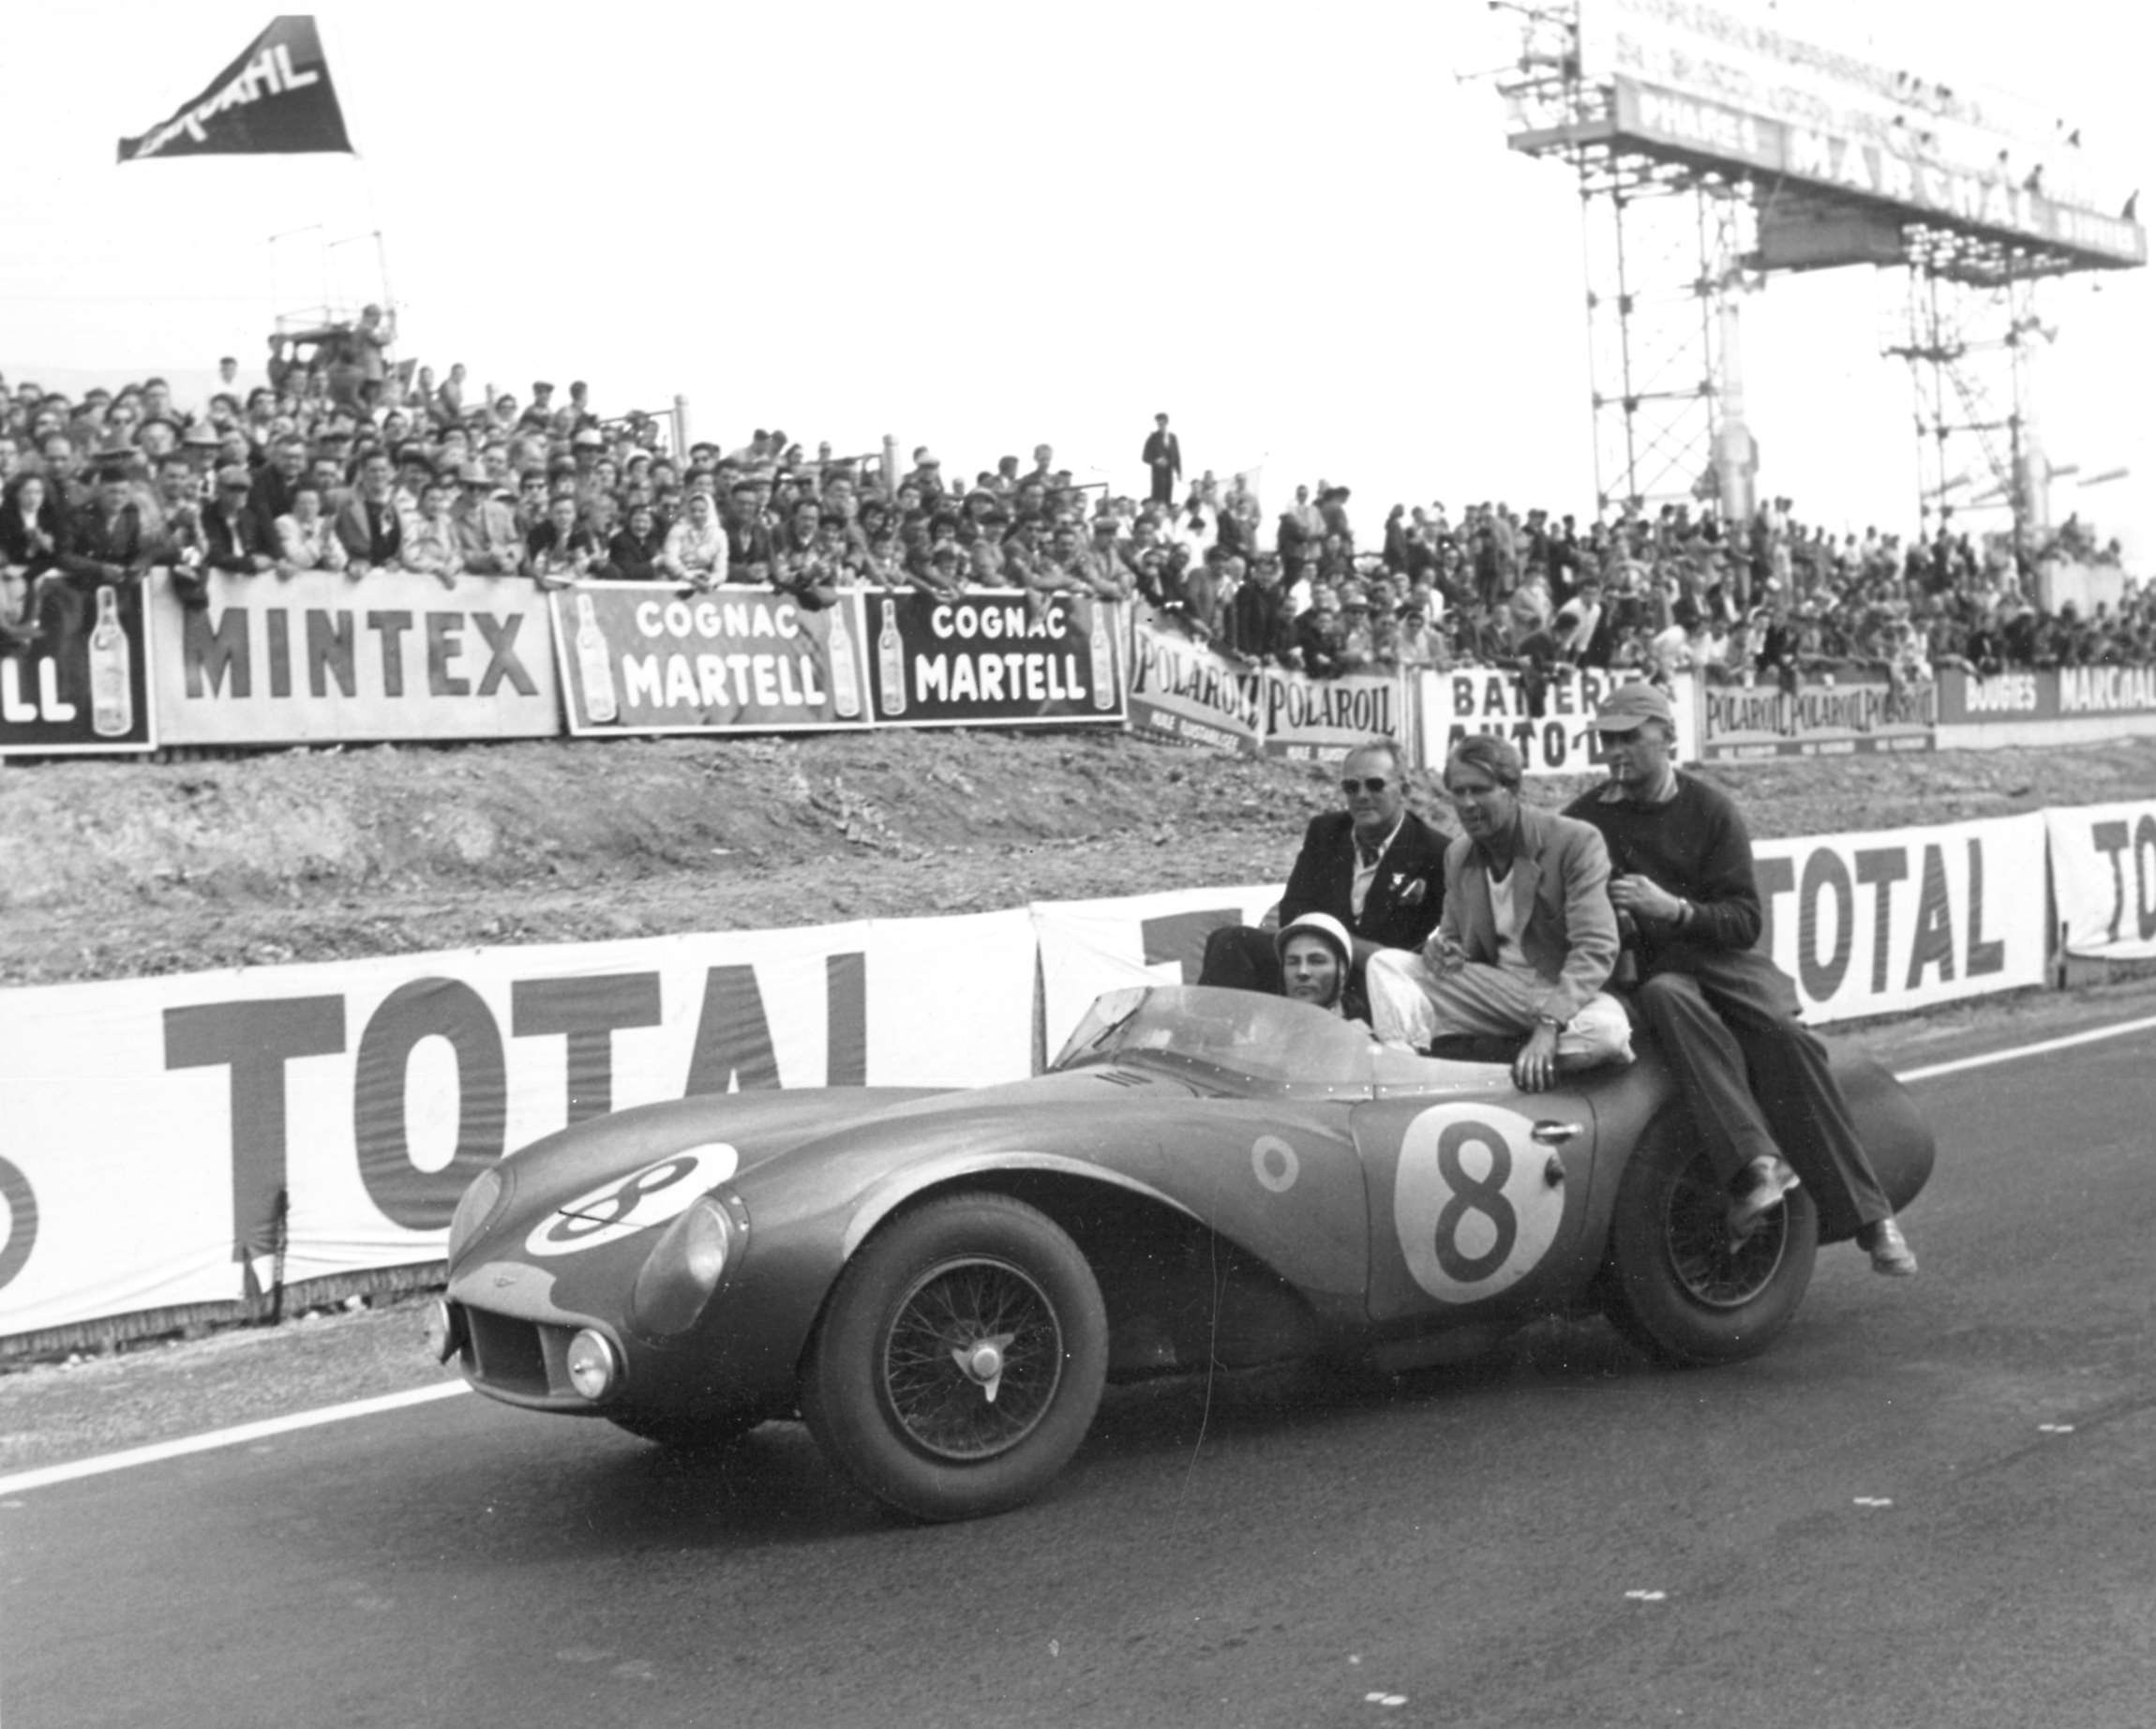 1956 Le Mans 24-Hours - 2nd place overall for the works Aston Martin DB3S, Moss driving, with company head David Brown, co-driver Peter Collins and team manager John Wyer behind him.